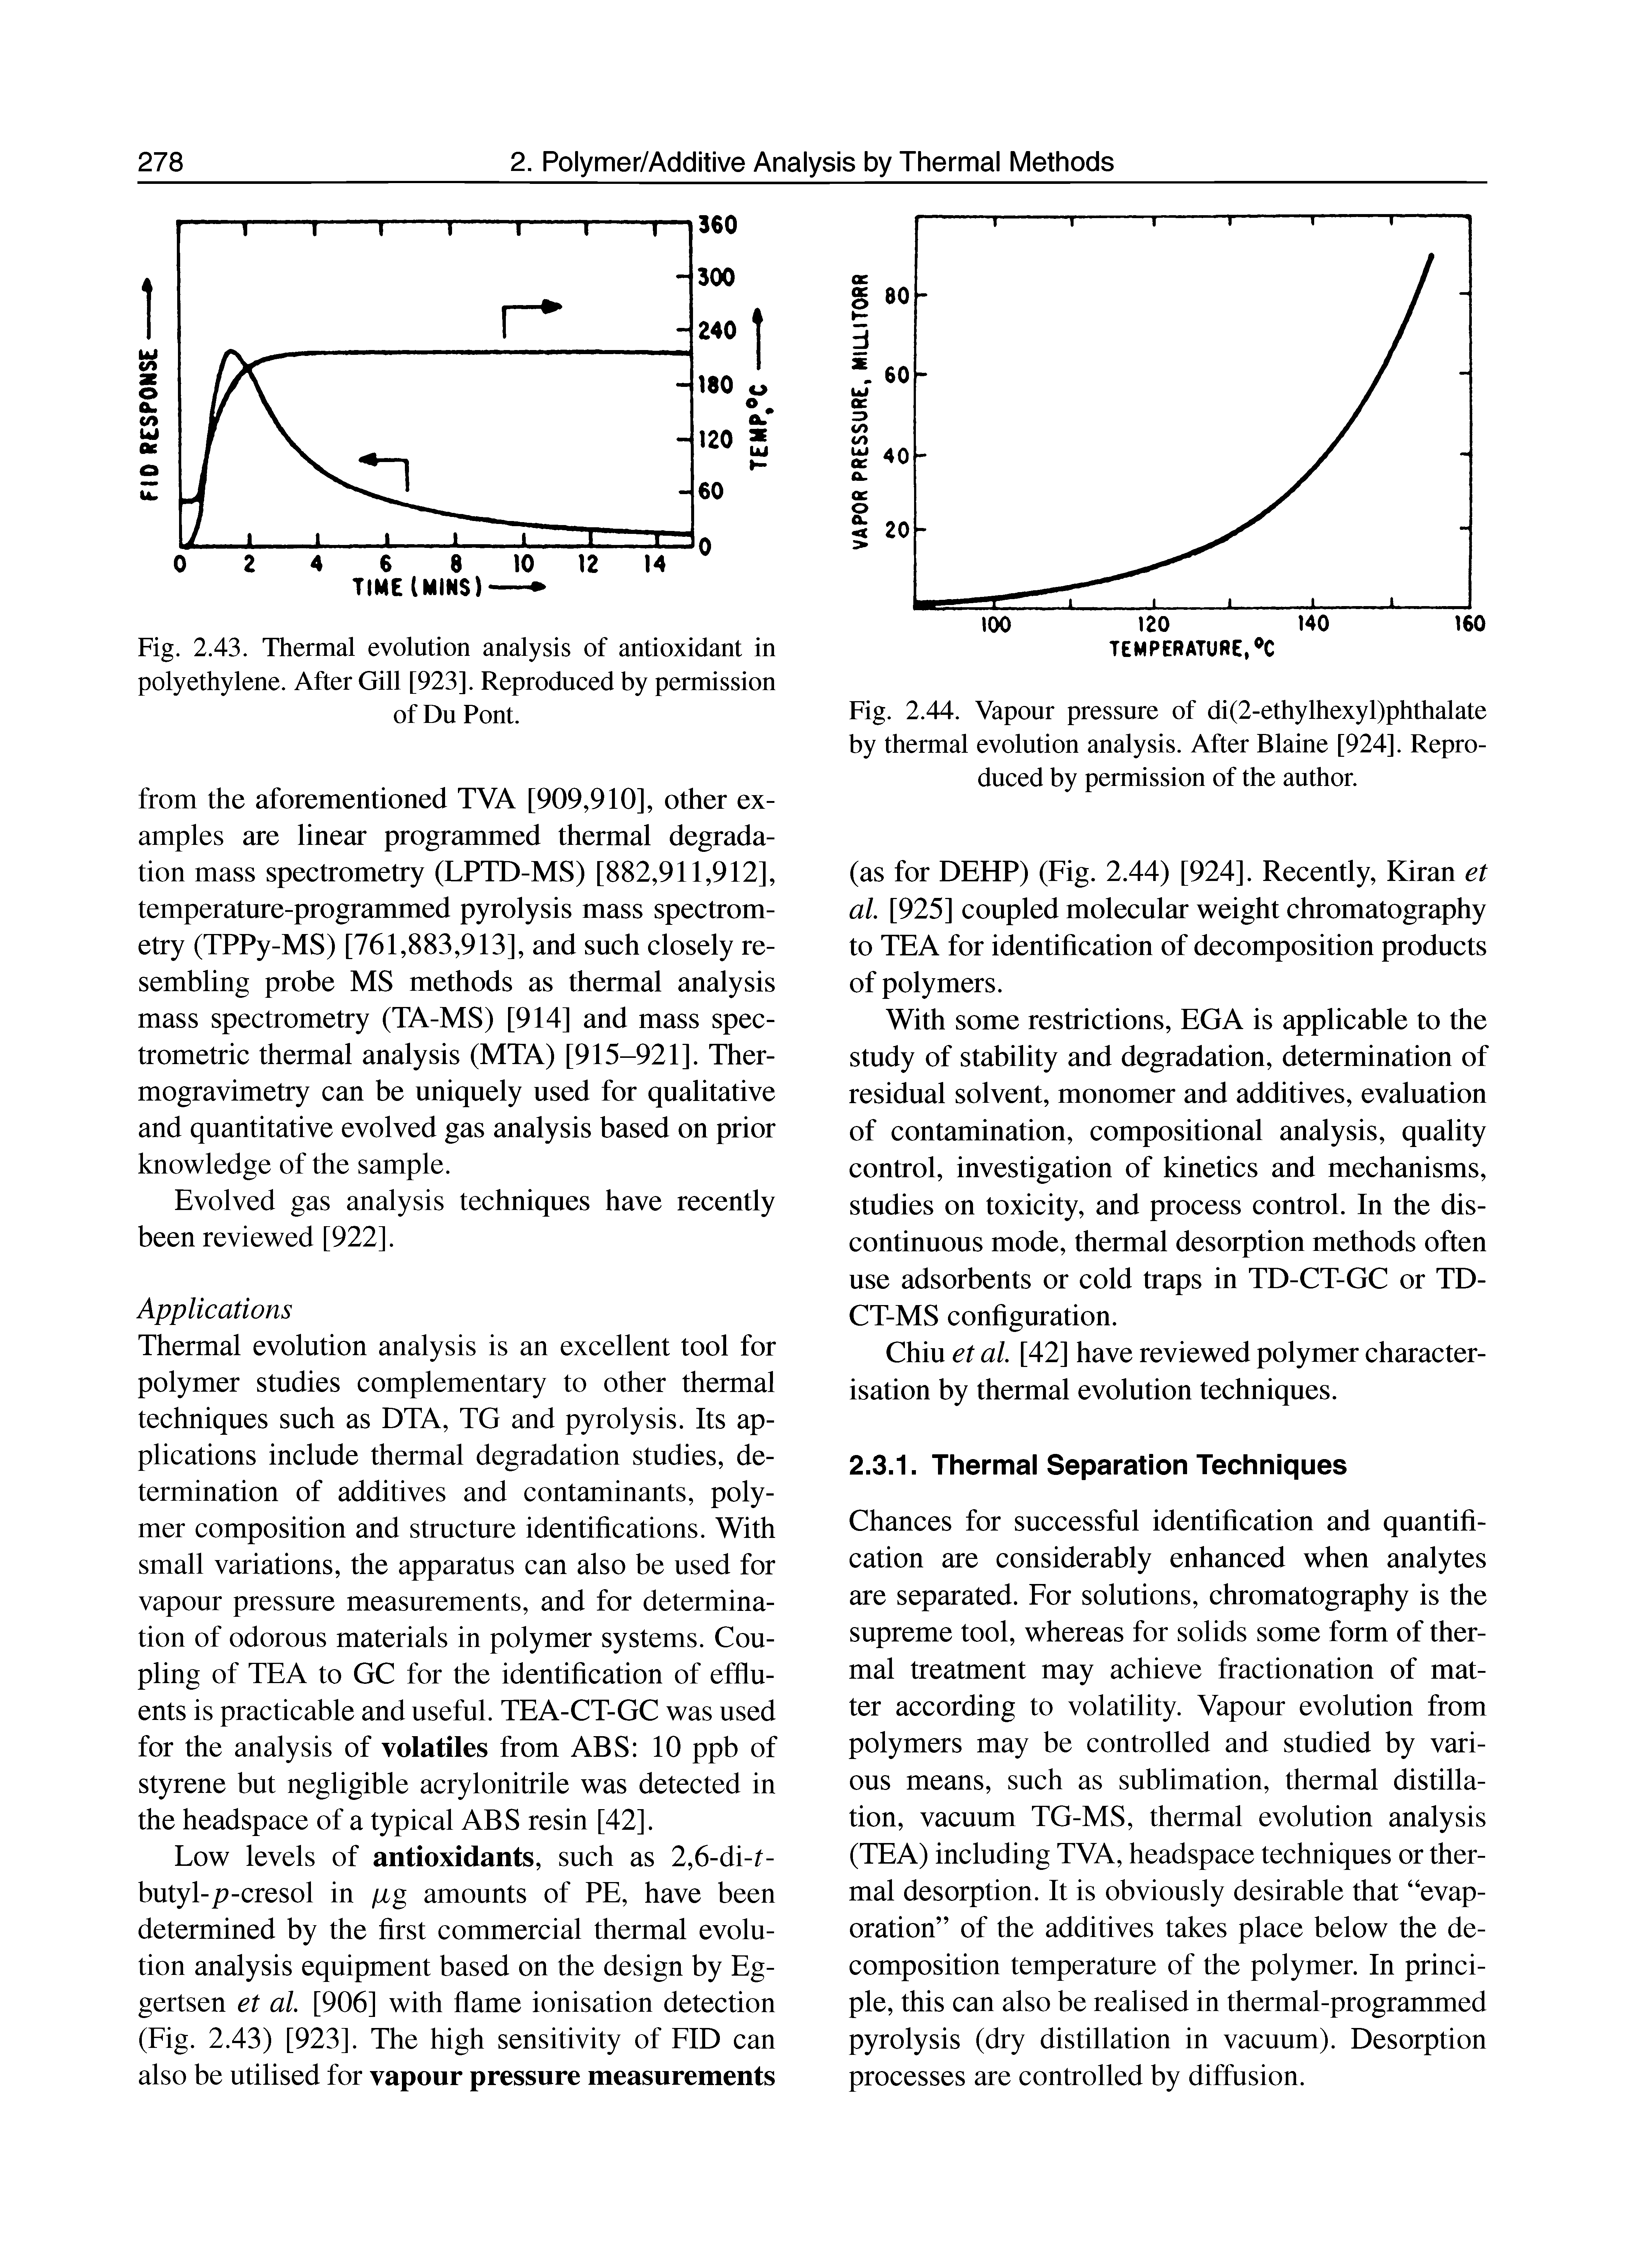 Fig. 2.44. Vapour pressure of di(2-ethylhexyl)phthalate by thermal evolution analysis. After Blaine [924]. Reproduced by permission of the author.